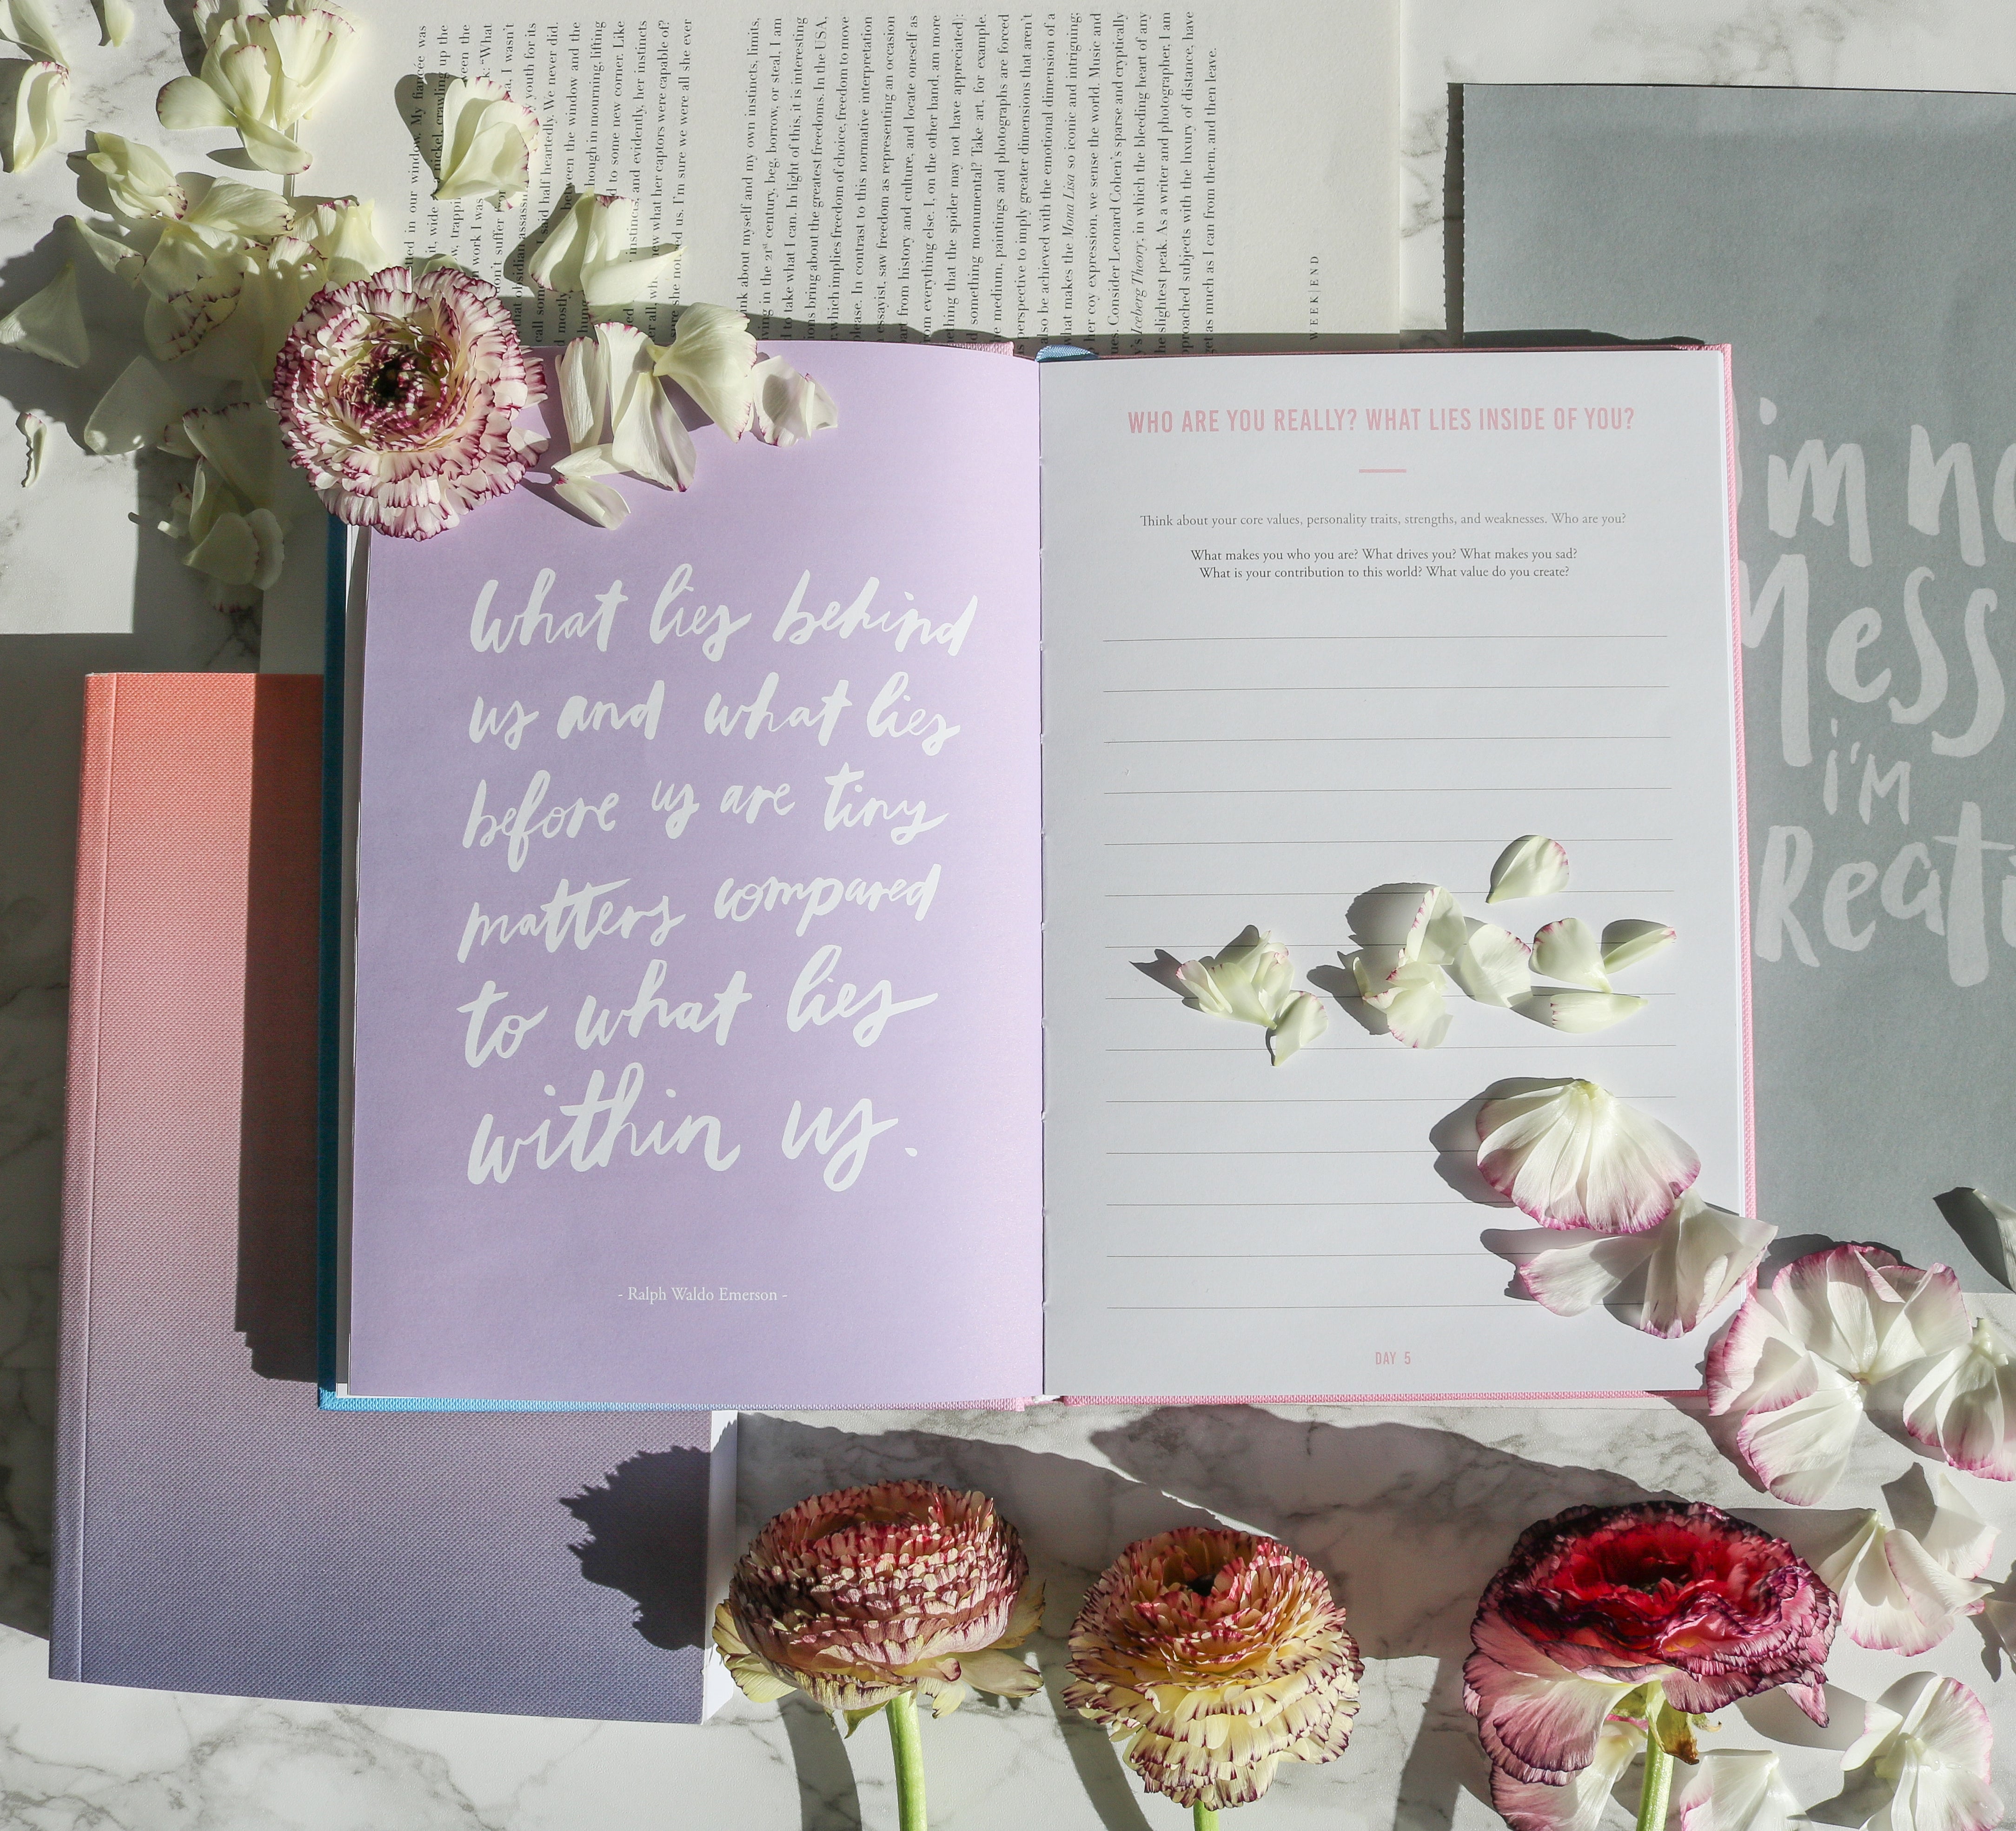 Explore Your Inner World | Self-Love Journal - The Happiness Planner®